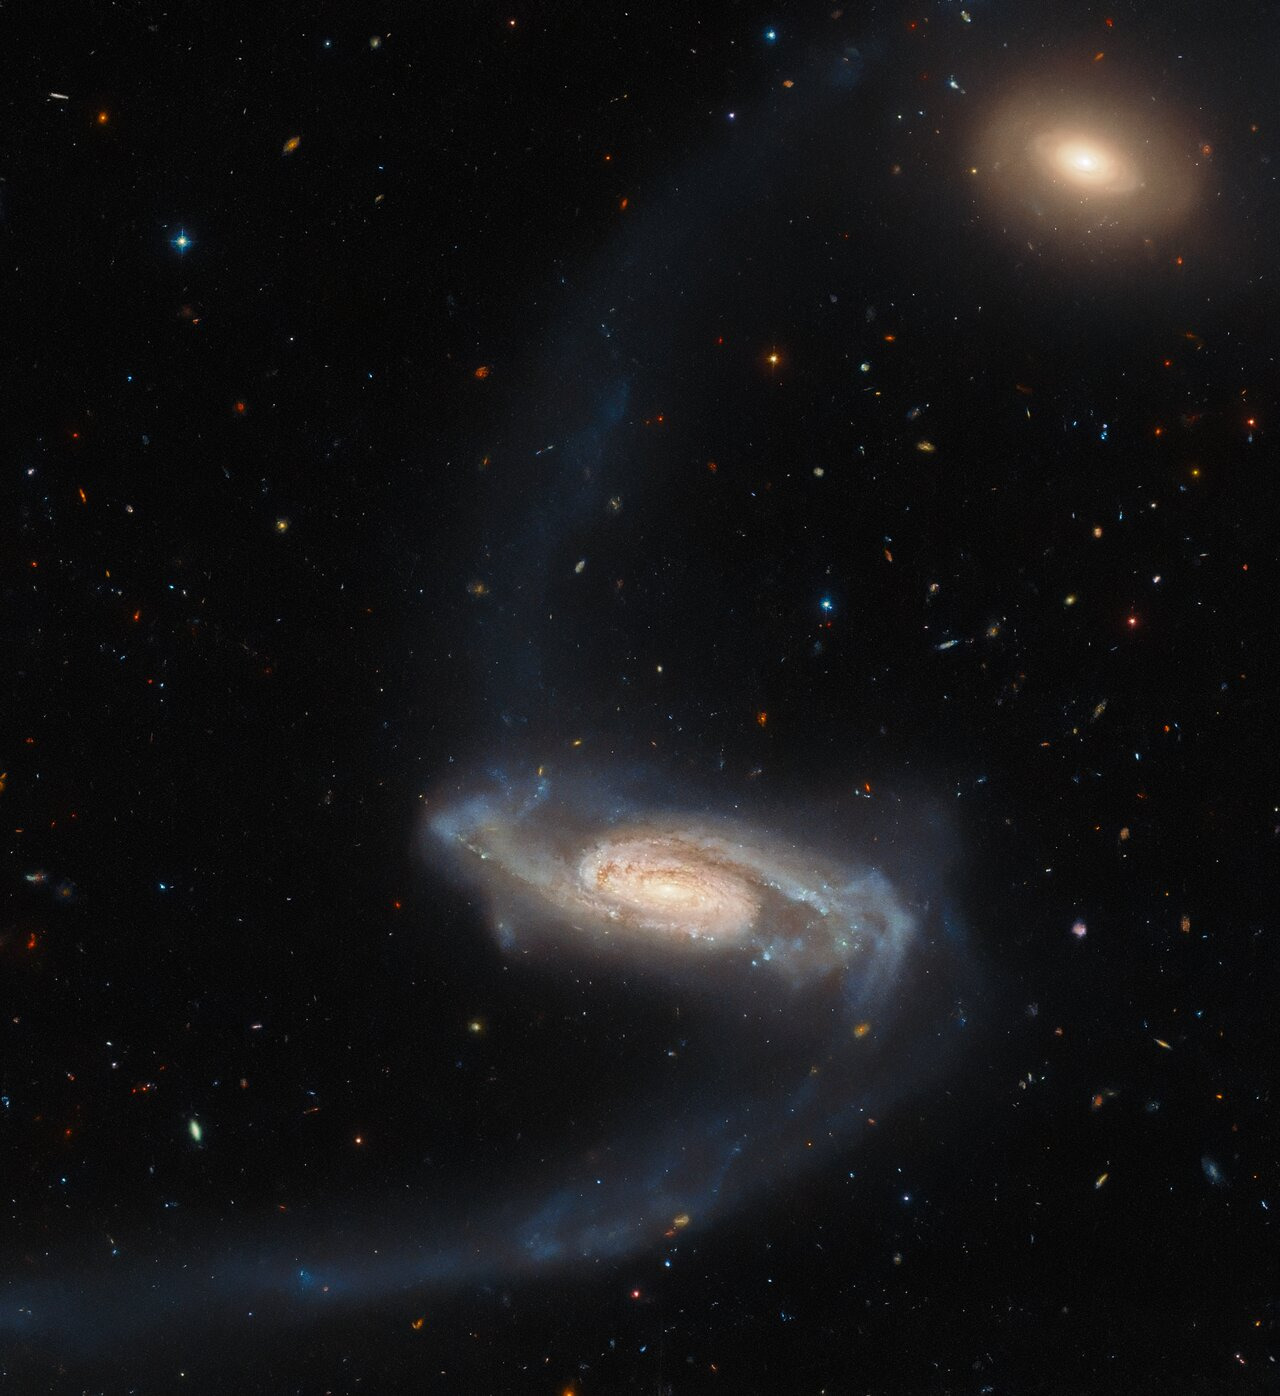 A spiral galaxy. It has a bright core with patches of dark dust, and fuzzier, dimmer spiral arms in cooler colours, with spots of bright blue. Long, faint tidal streams stretch from the galaxy’s arms: one up to the top of the frame, one curving down to the bottom-left corner. In the top-right there is a smaller, orange elliptical galaxy. The background is studded with many tiny stars and galaxies.